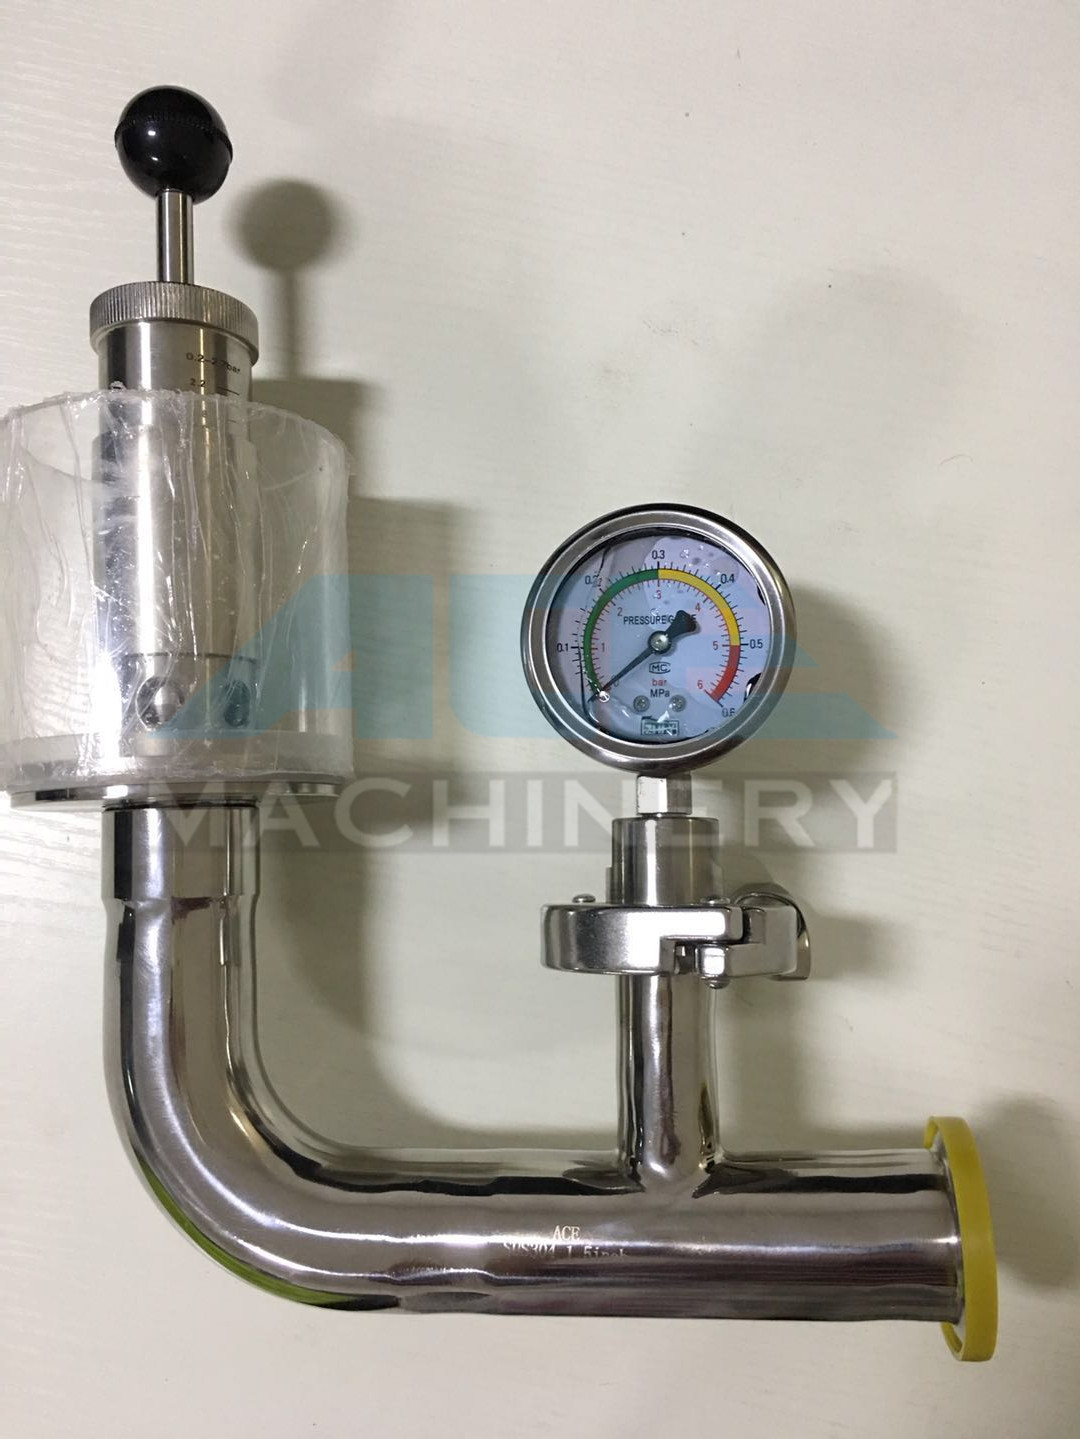  Stainless Steel Sanitary Pressure Relief Safety Vacuum Spunding Valve for Beer Brewing Device Manufactures